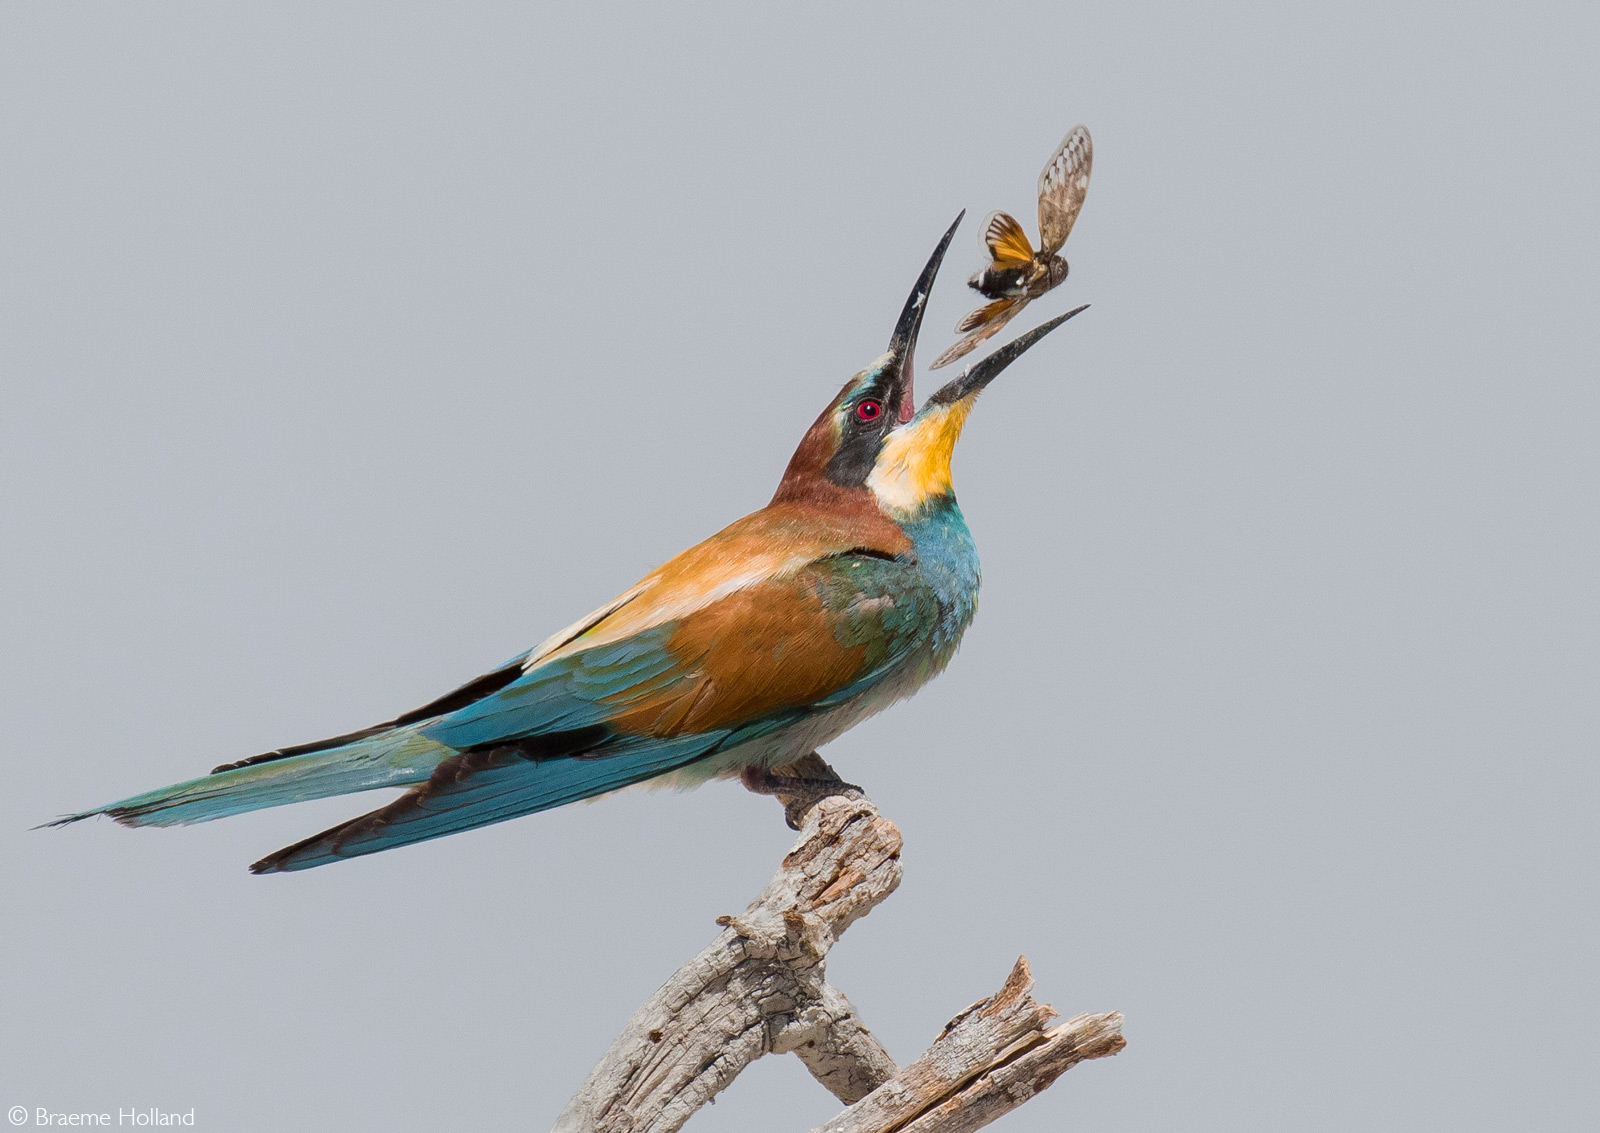 A European bee-eater attempts to catch a moth for his meal. Cape Town, South Africa © Braeme Holland